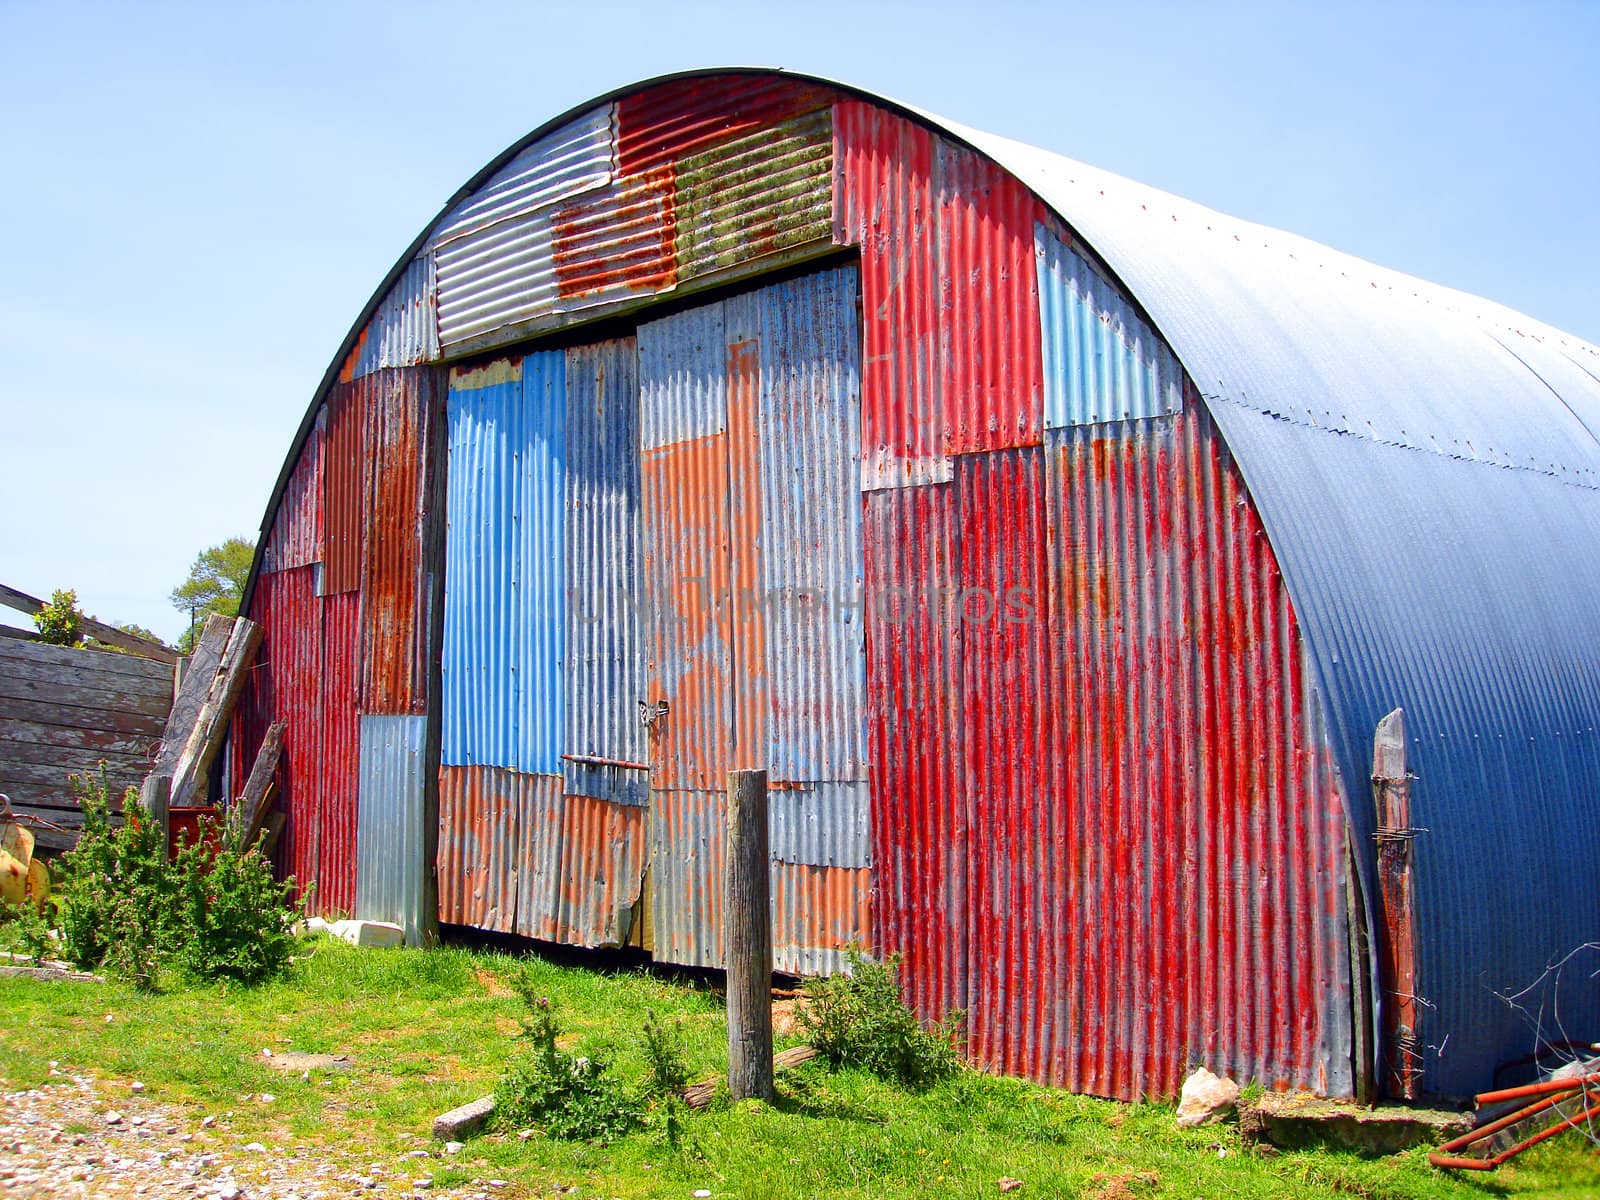 Round Metal Shed on Farm with Mismatched Paint on front surface.